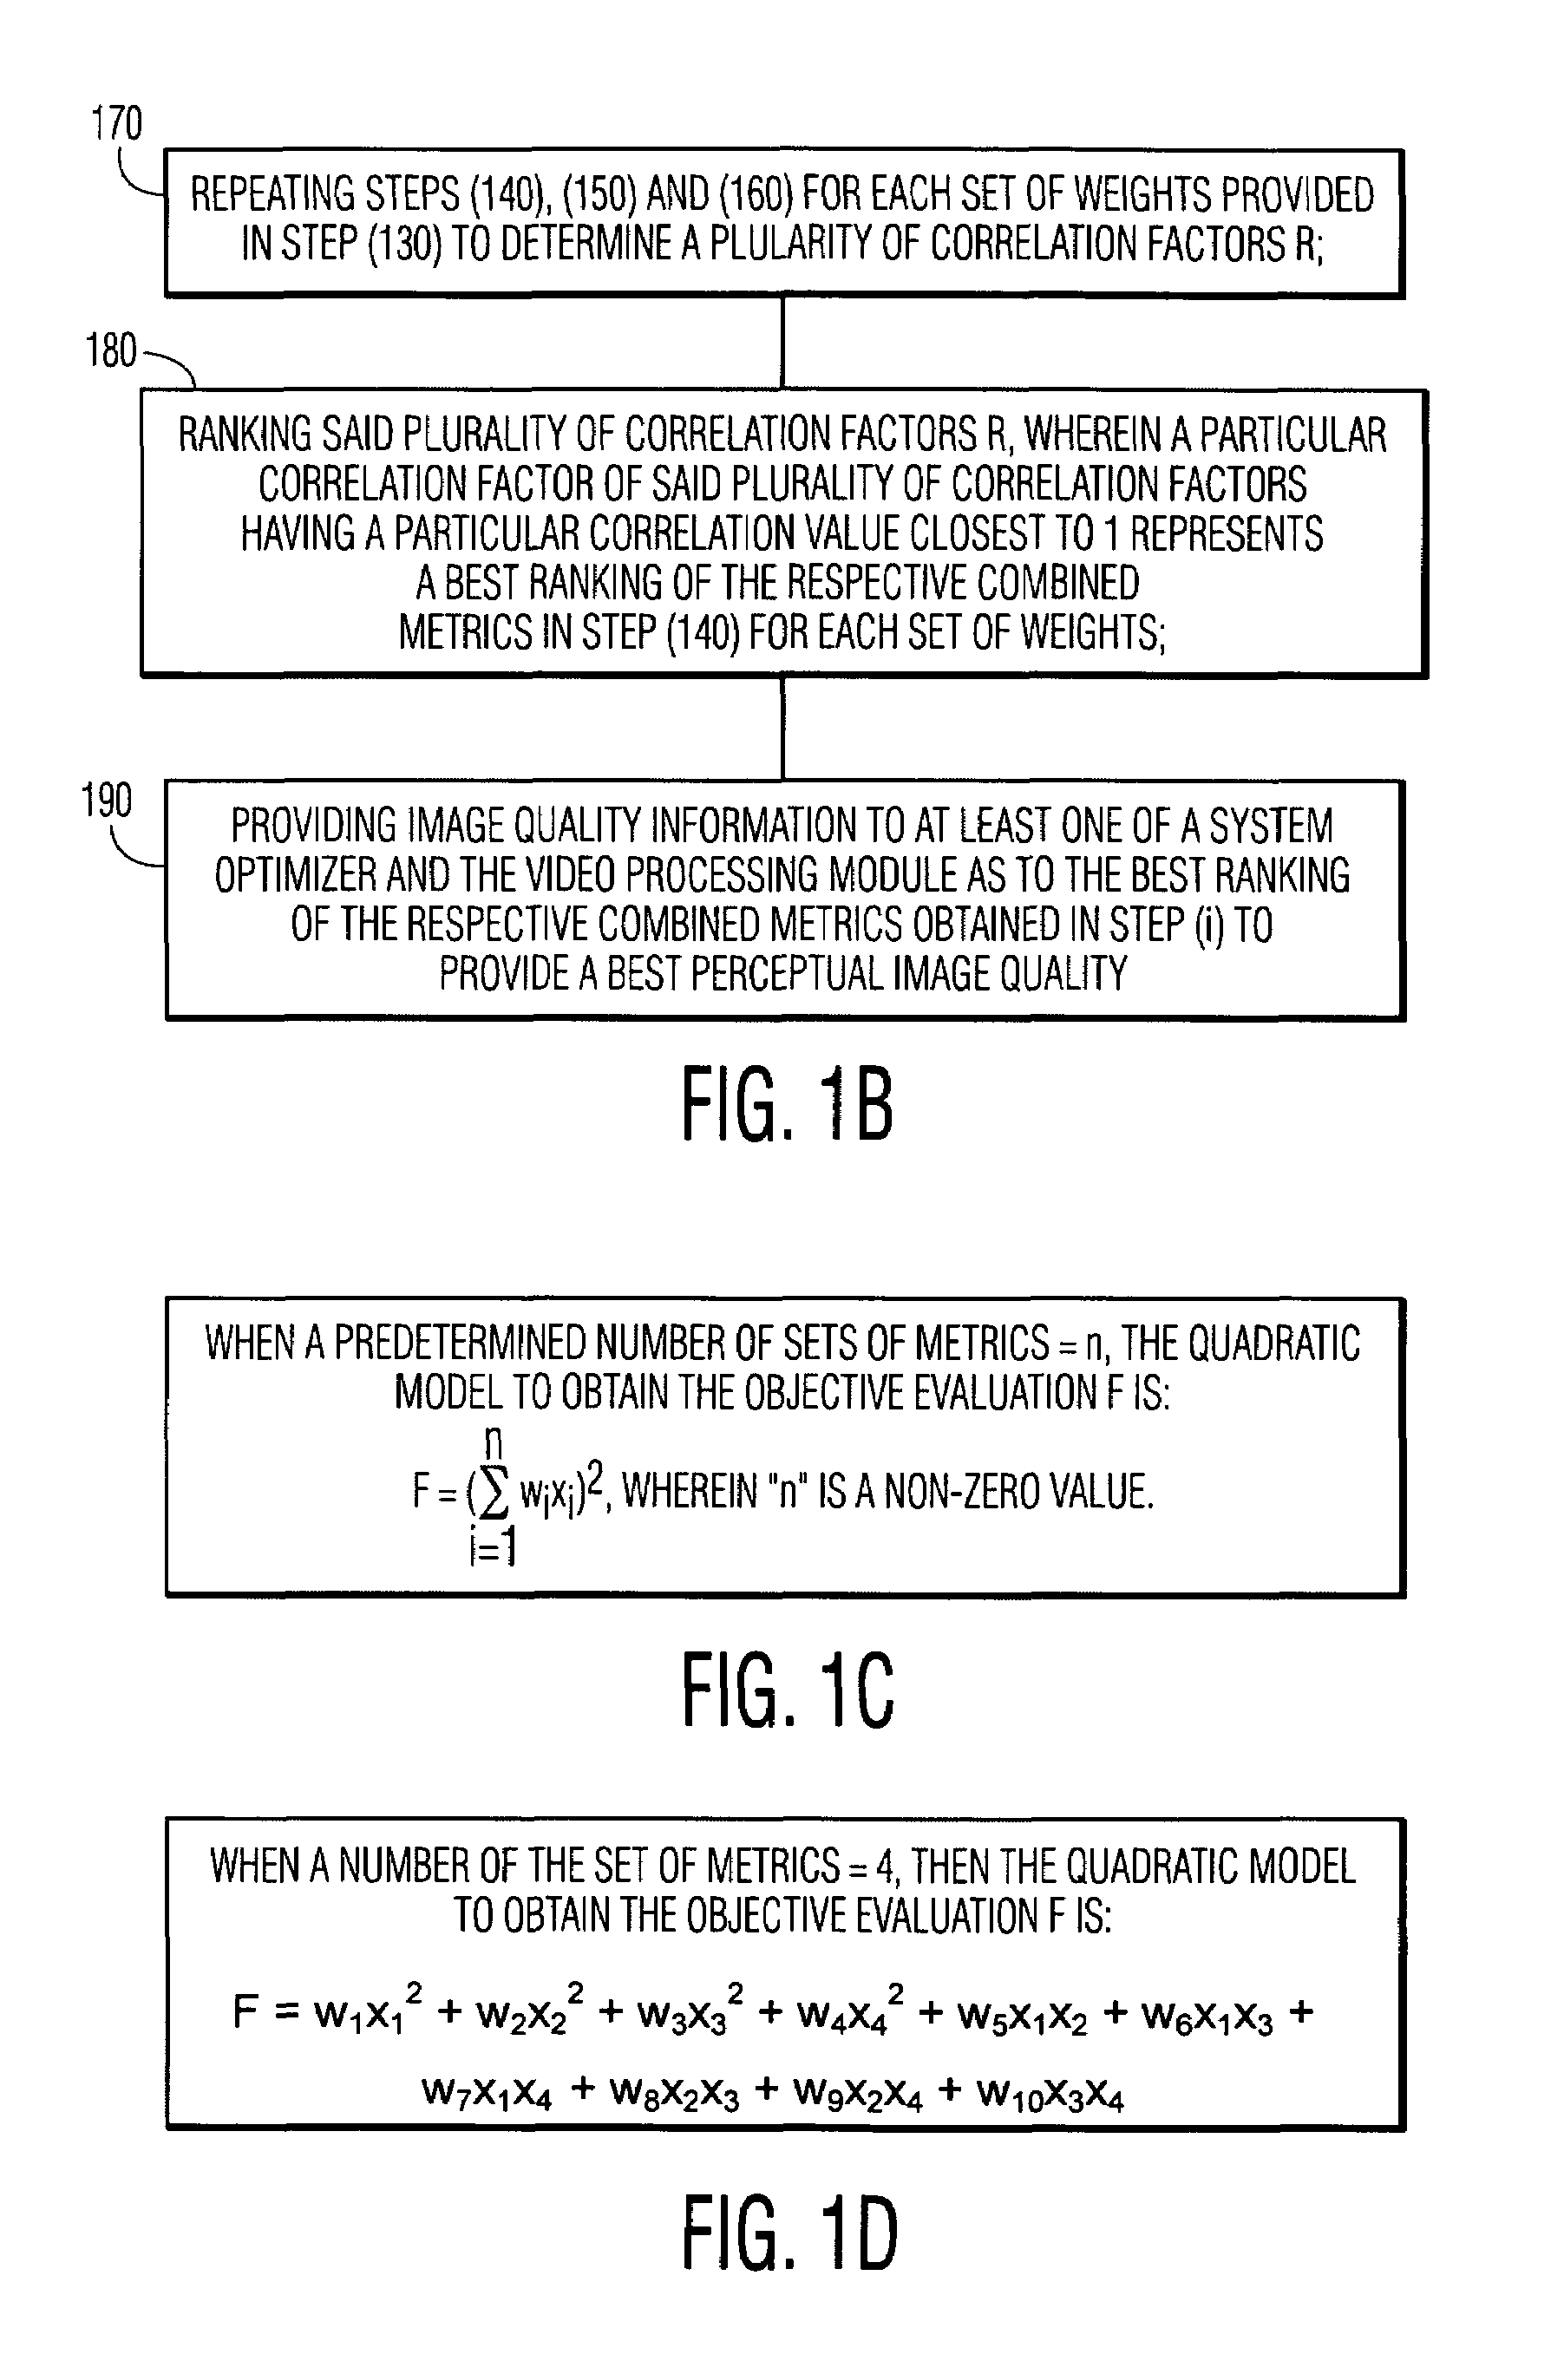 Apparatus and method for combining random set of video features in a non-linear scheme to best describe perceptual quality of video sequences using heuristic search methodology